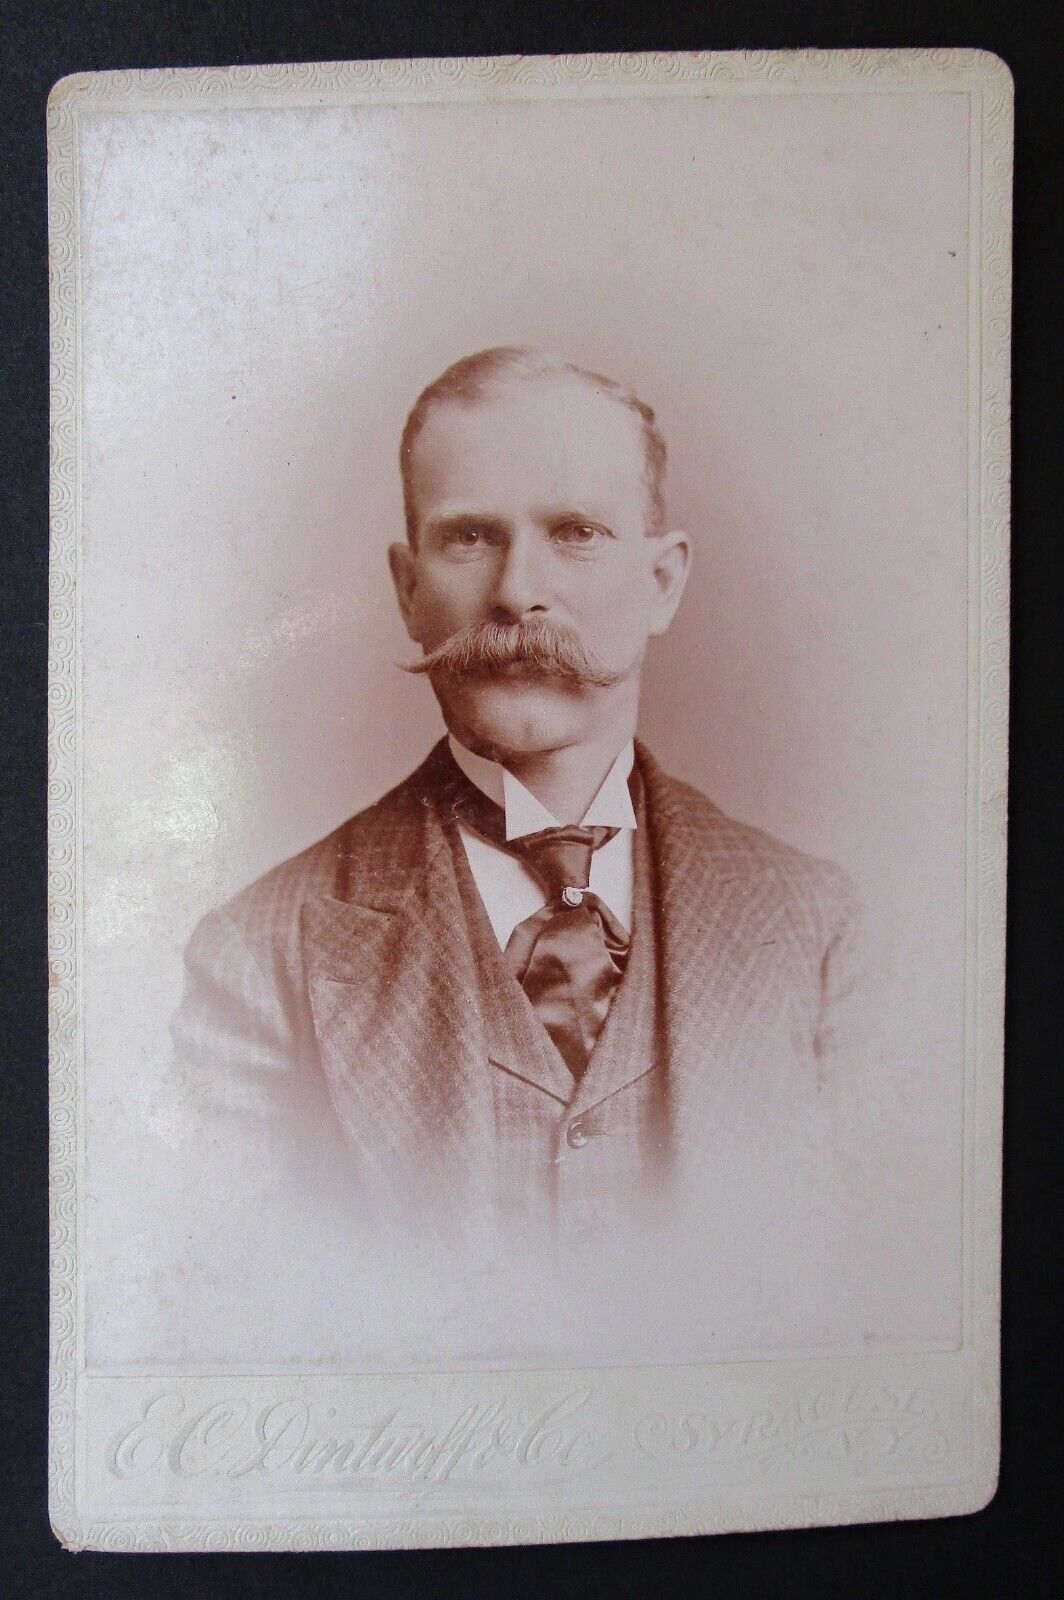 Antique Cabinet Card Photo Man with Mustache in Suit Syracuse NY 1890s